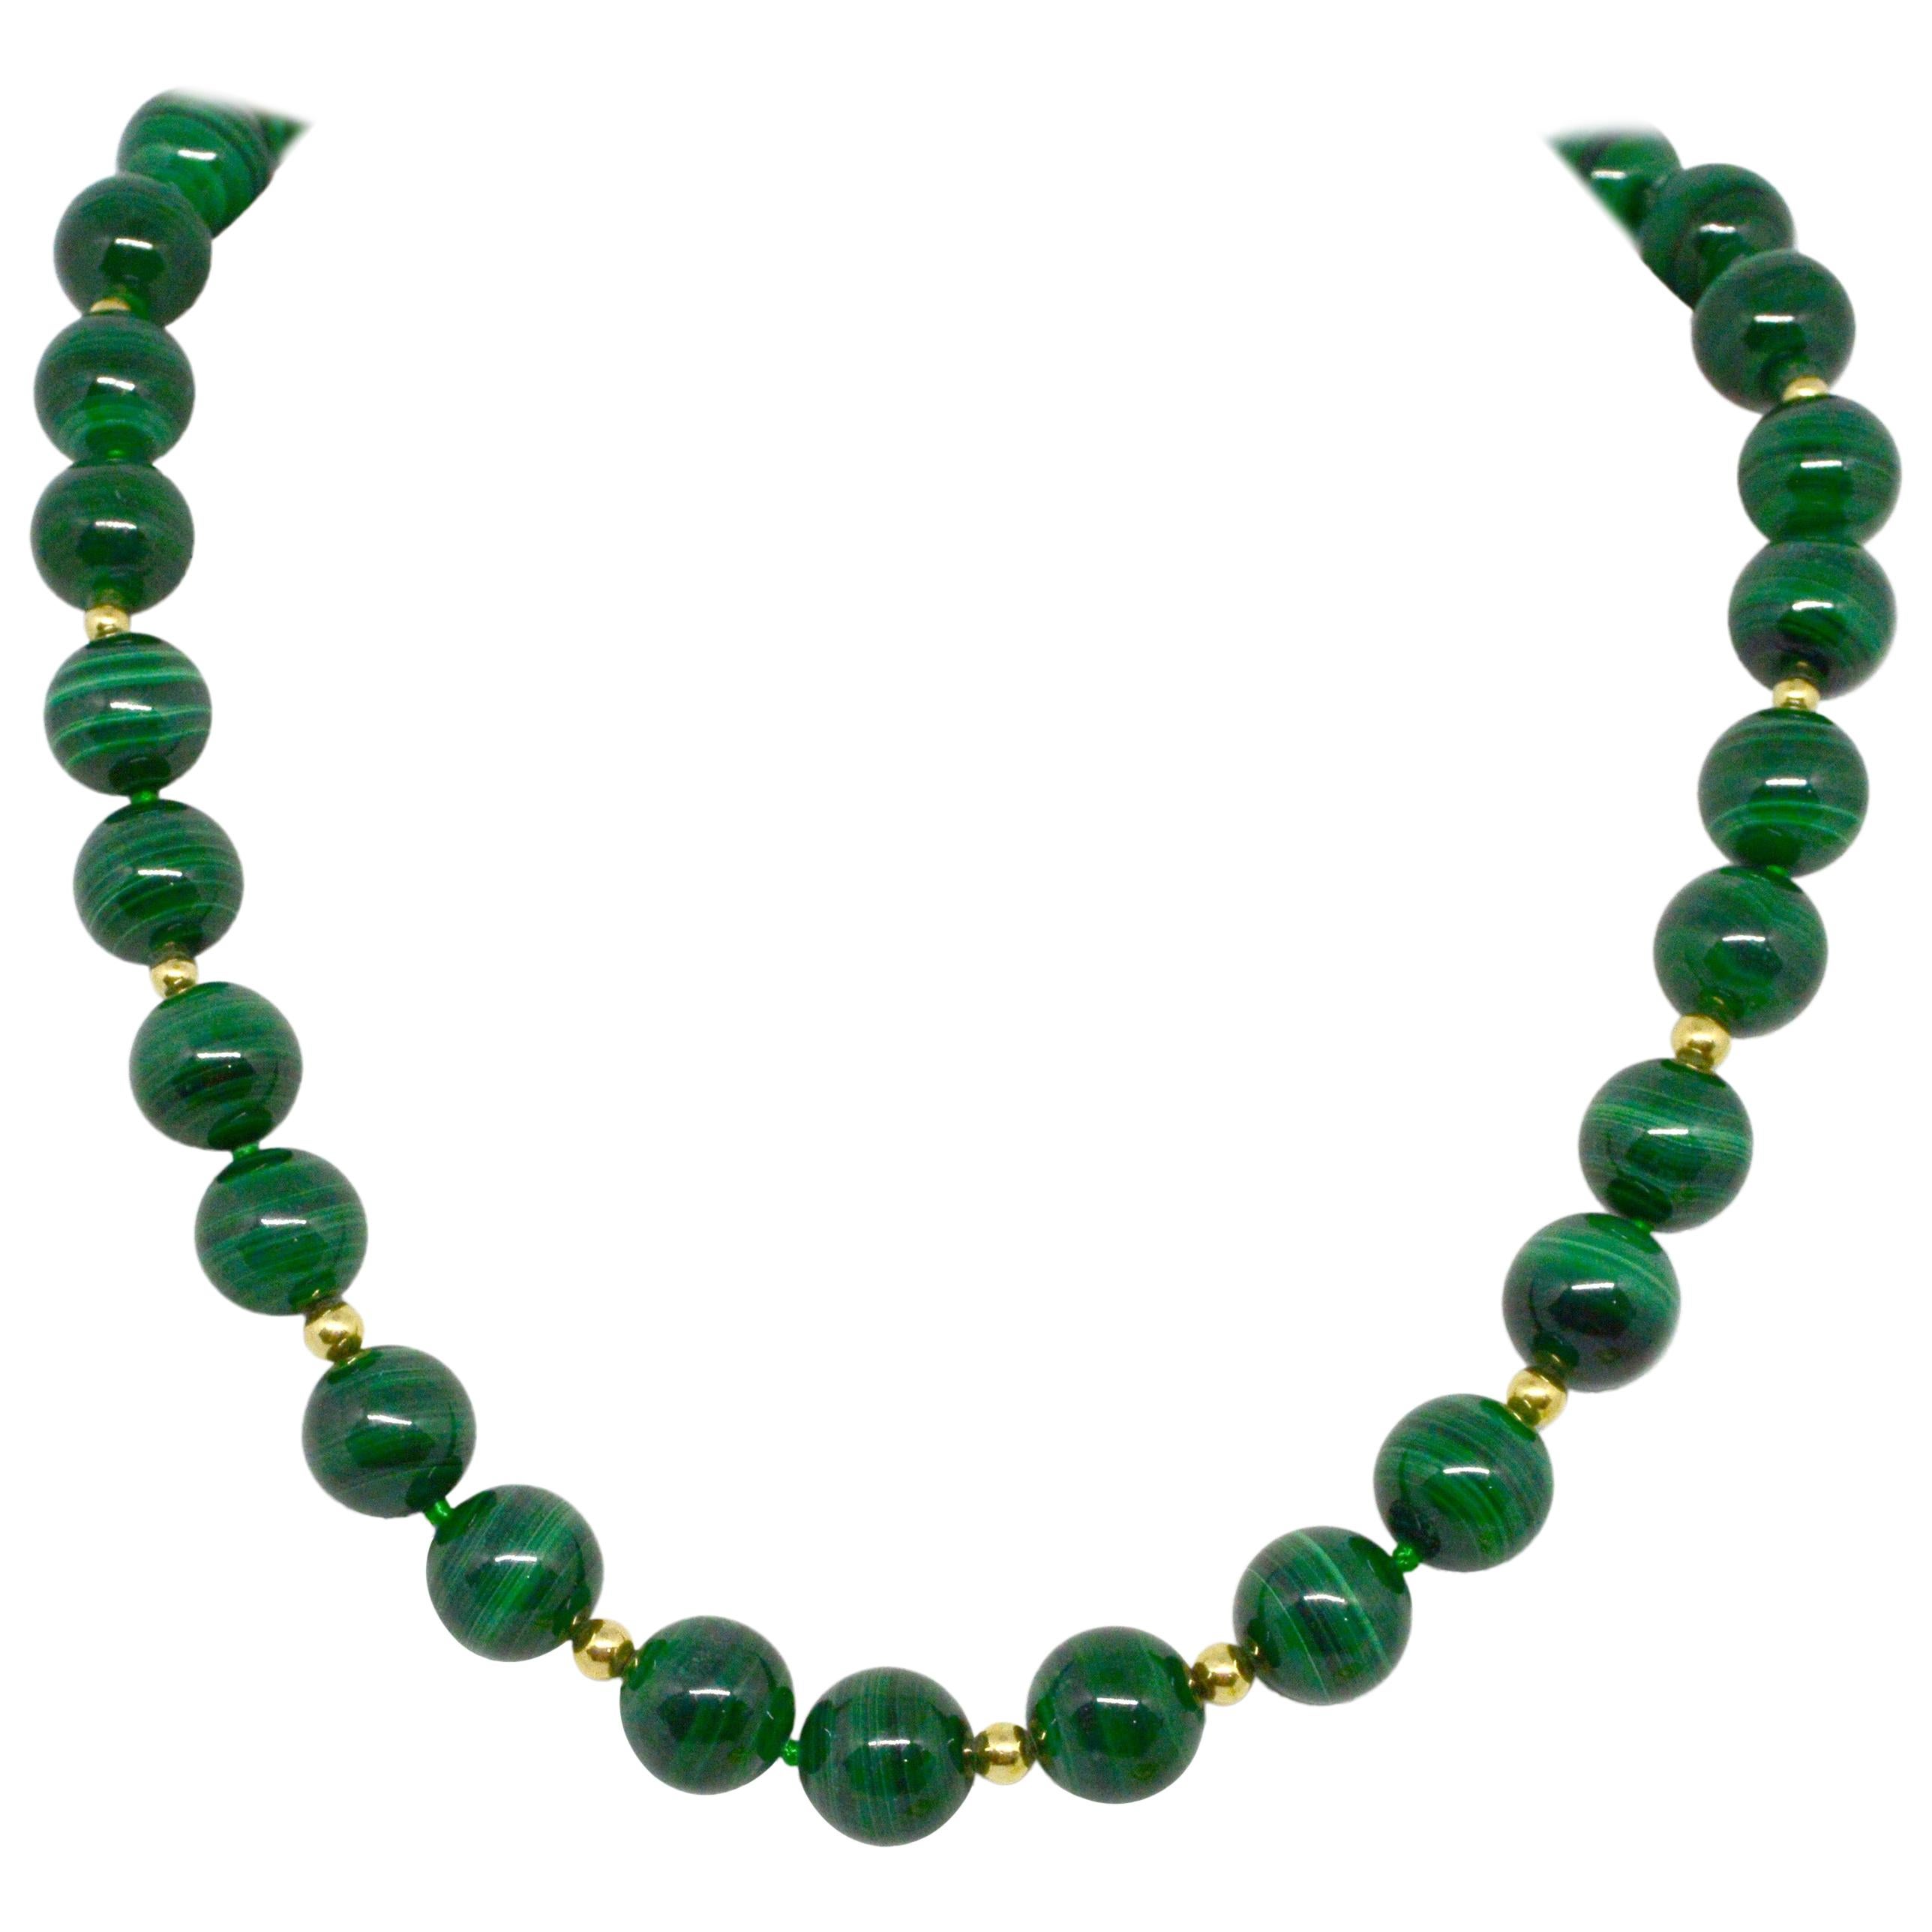 Malachite has banding of light and dark layers with concentric rings, straight stripes and other figurative shapes makes it such a stunning stone to wear.
Malachite is one of the oldest known stones and was popular in ancient Egypt, Greece and Rome,